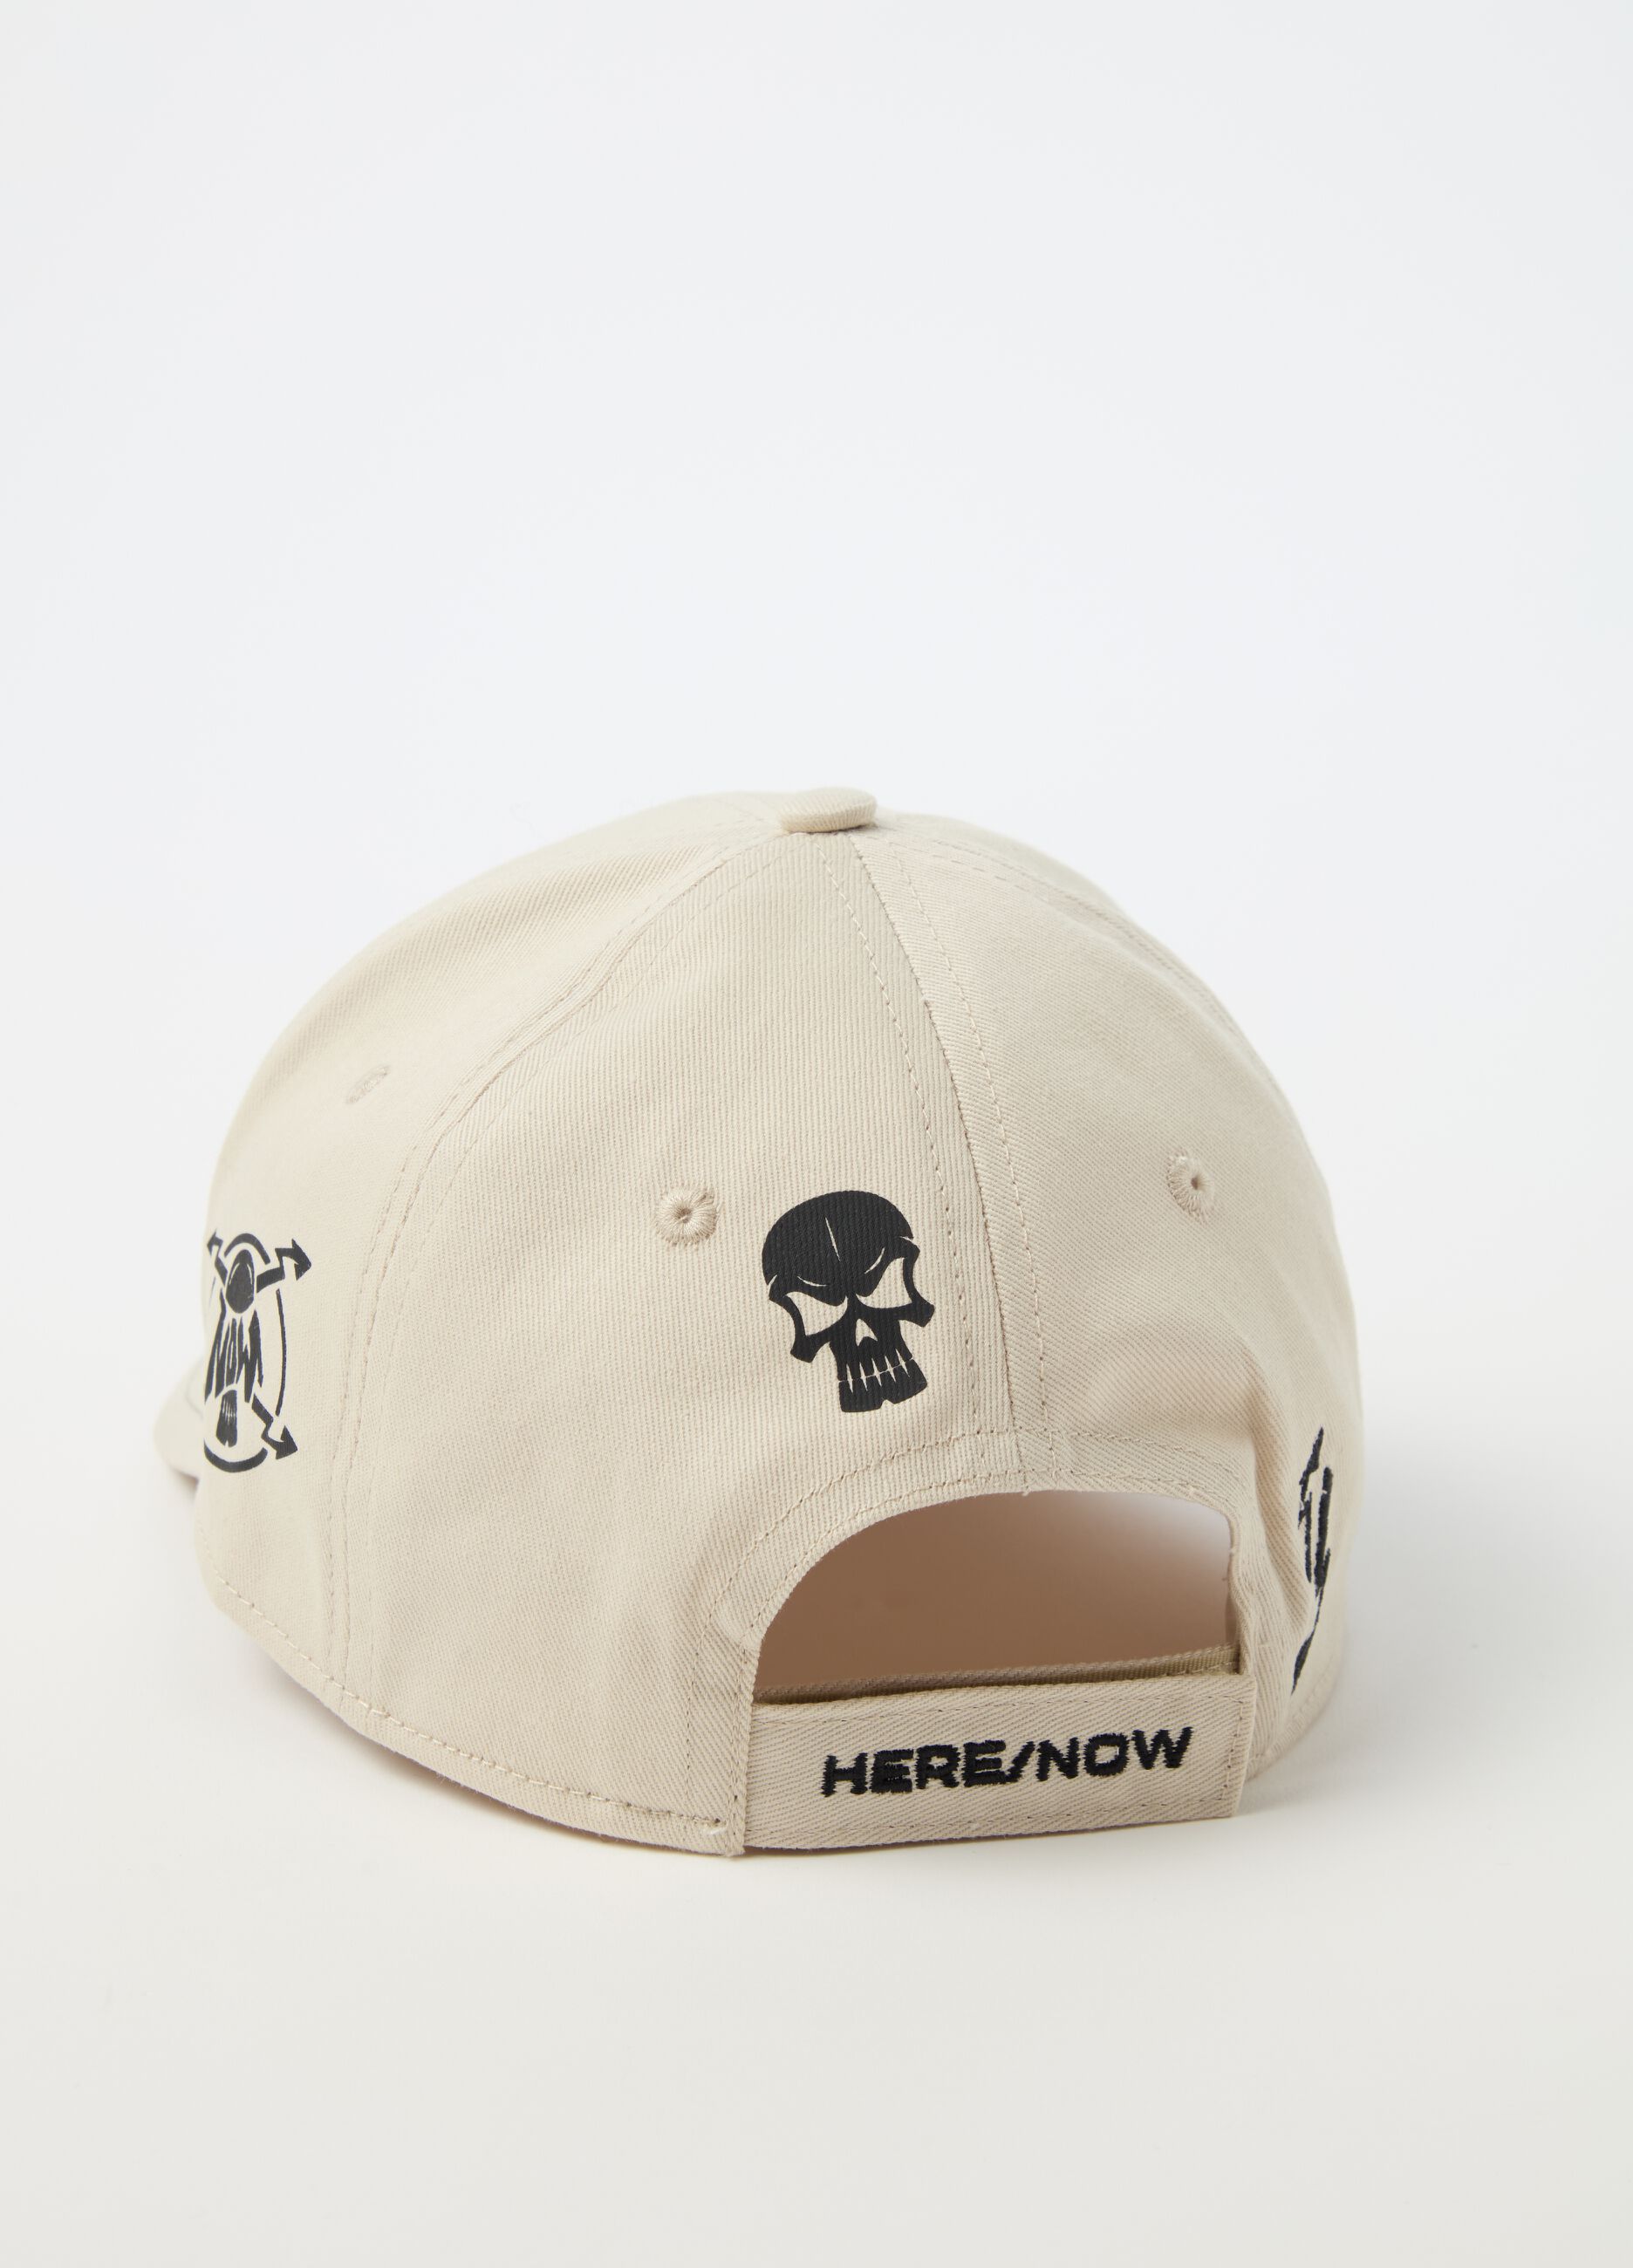 Baseball cap with lettering print